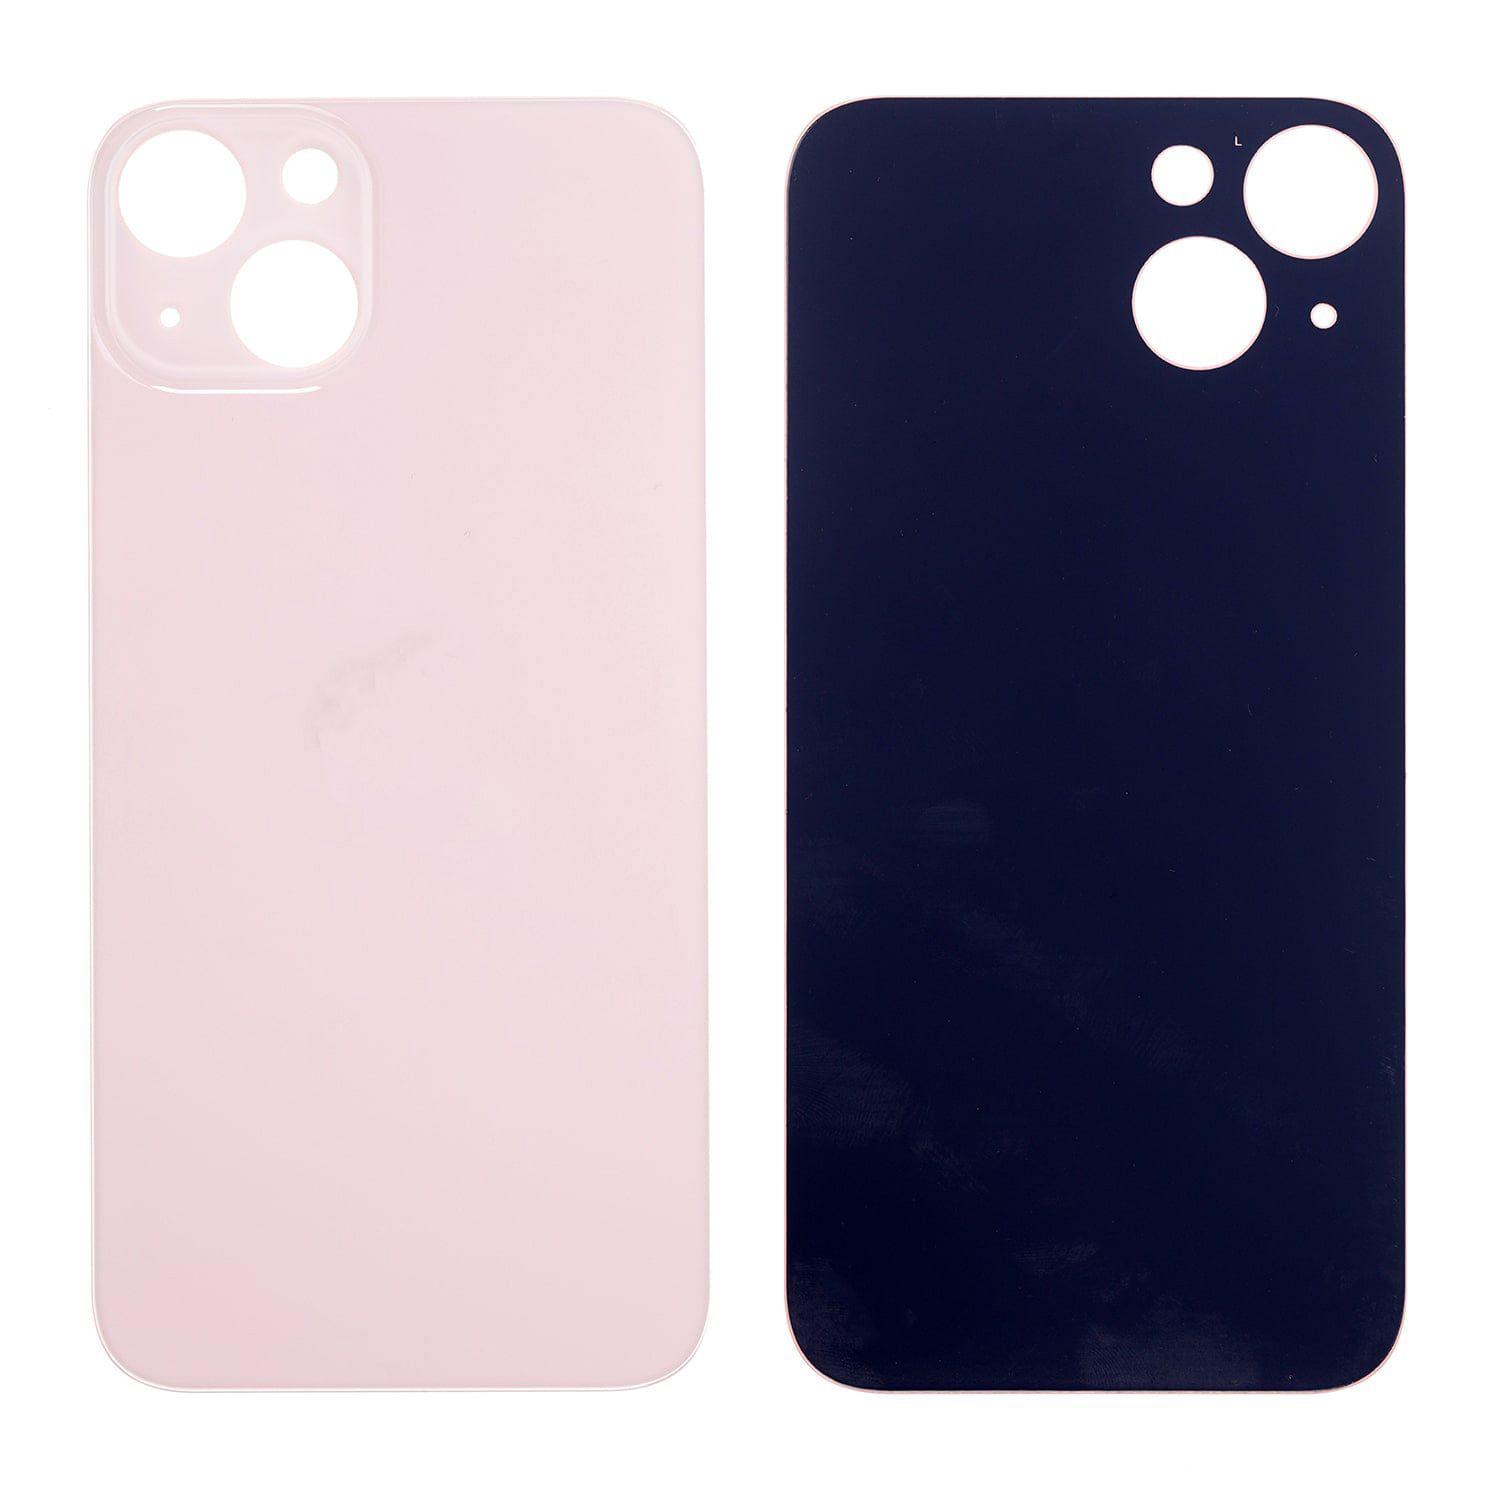 Battery cover iPhone 13 mini with bigger hole for camera glass - pink